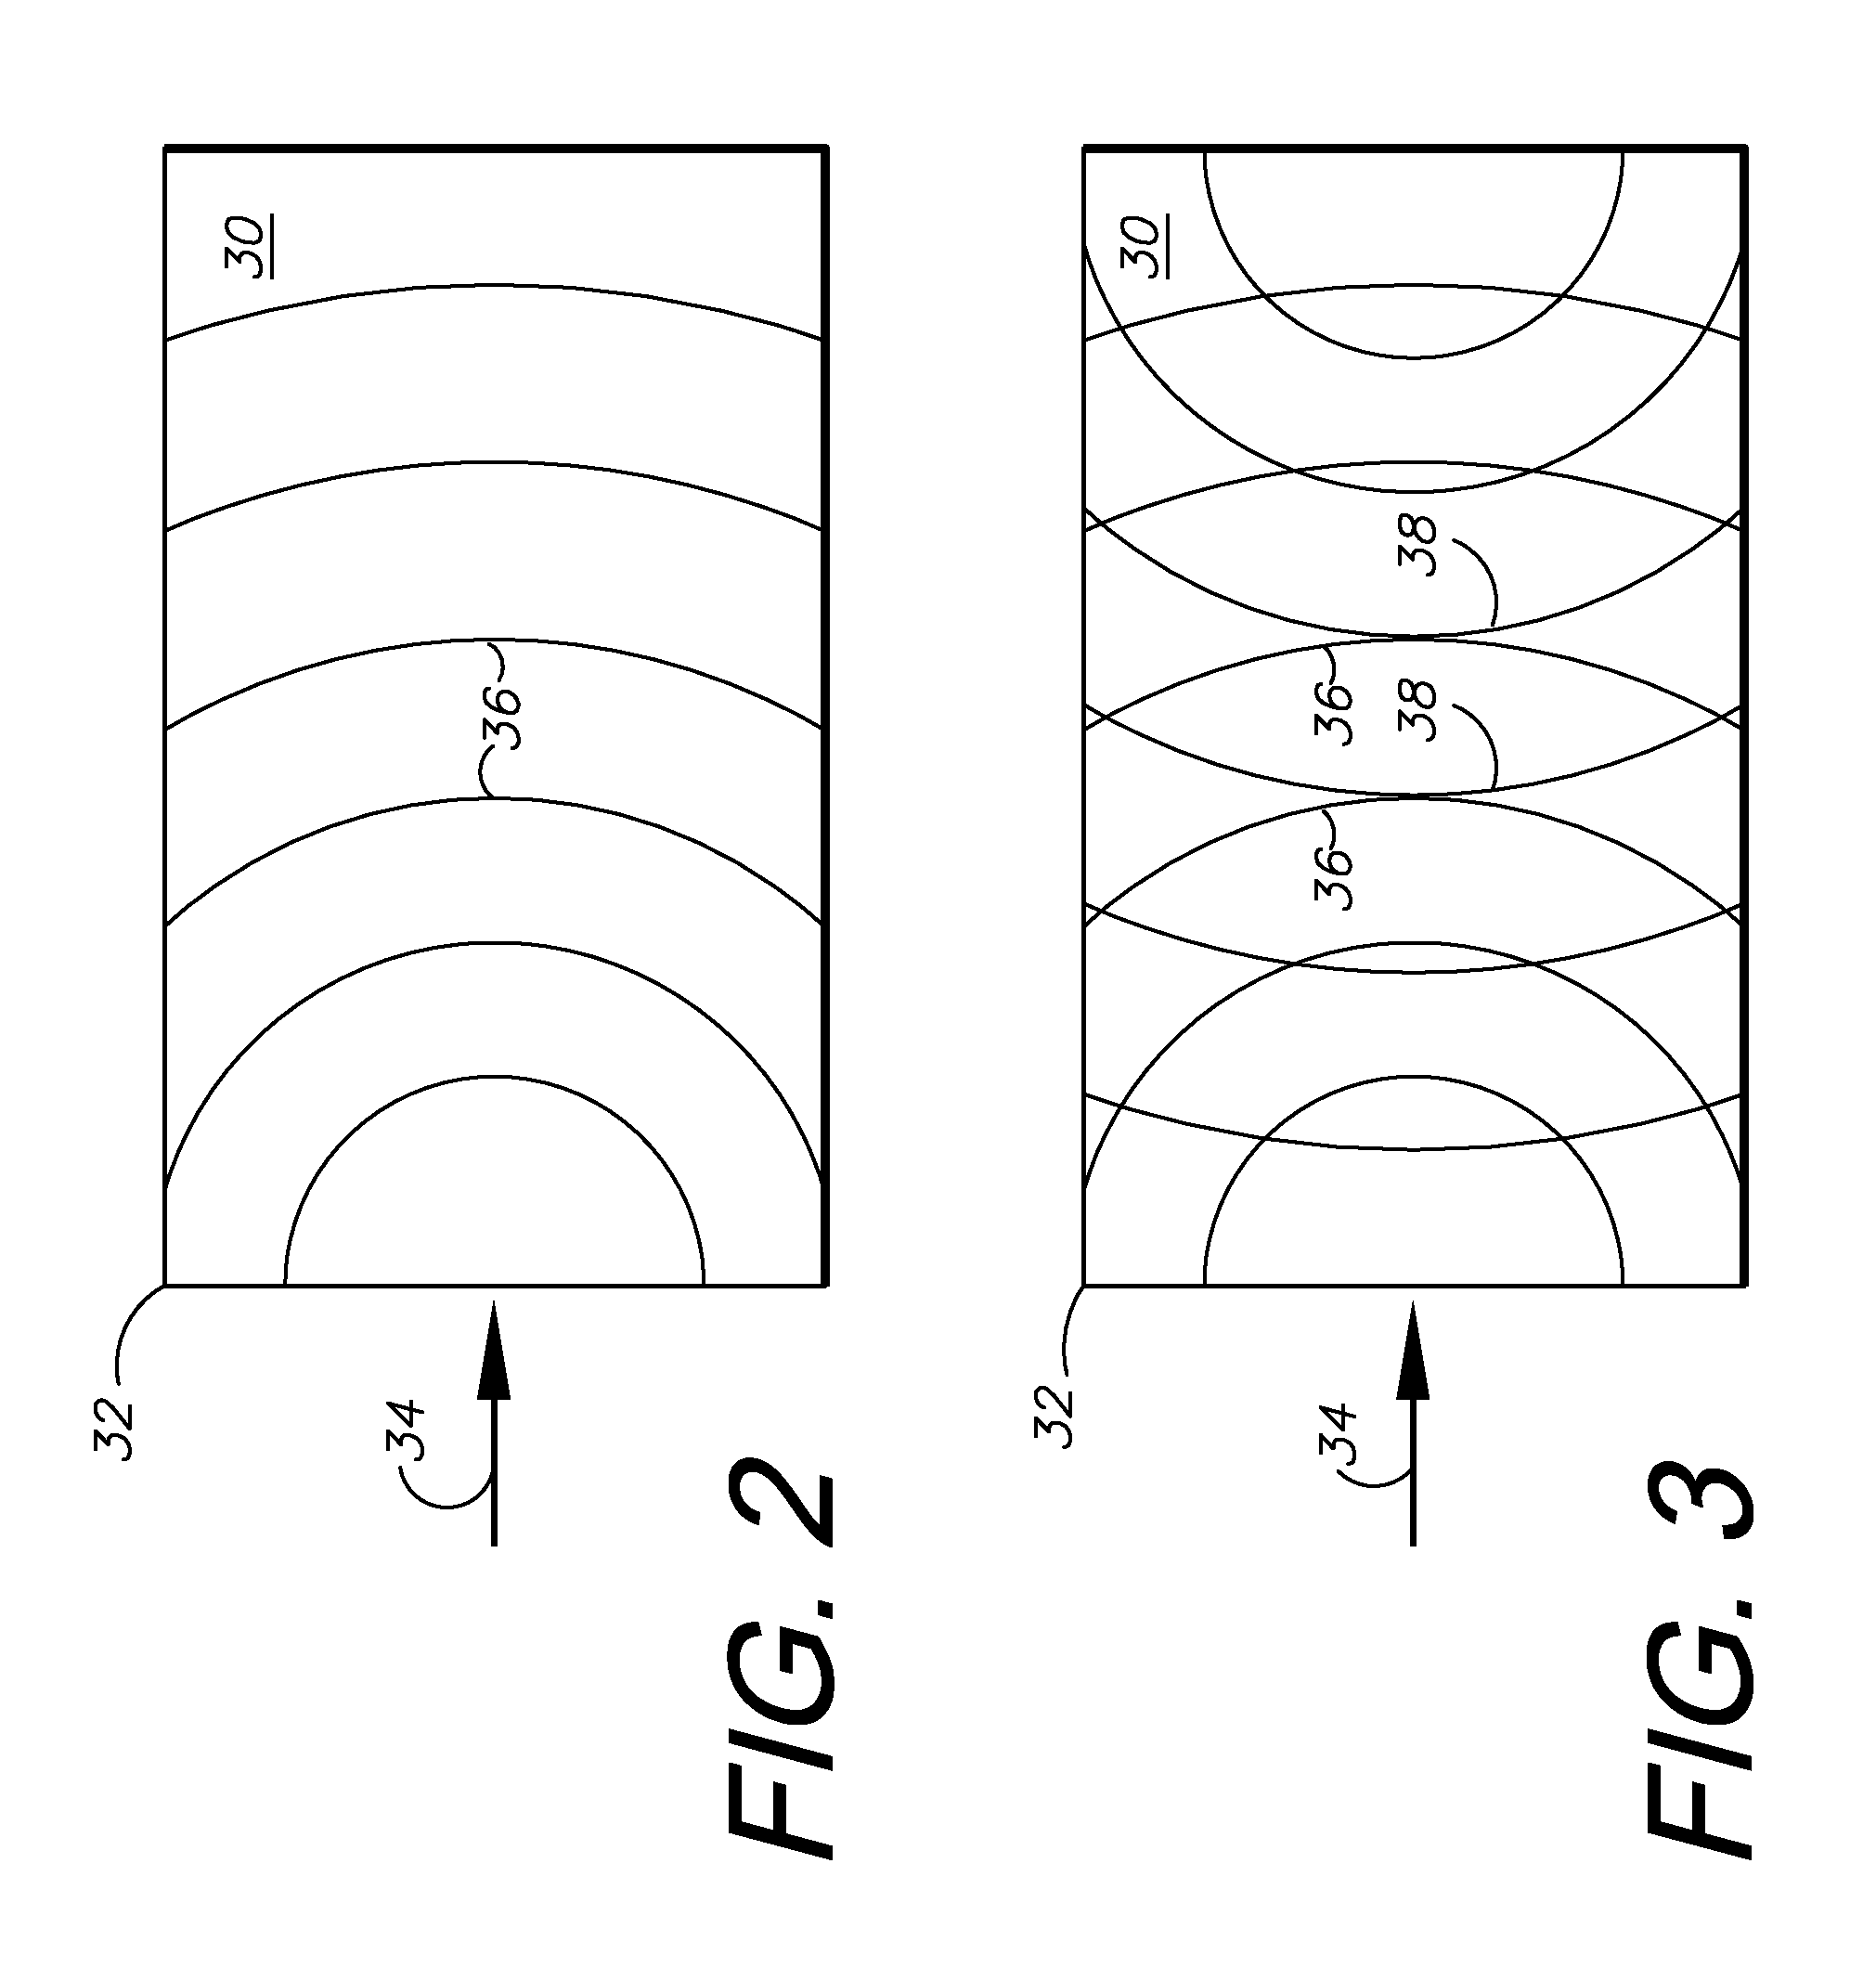 Simulation and control system and method using contact, pressure waves and factor controls for cell regeneration, tissue closure and related applications